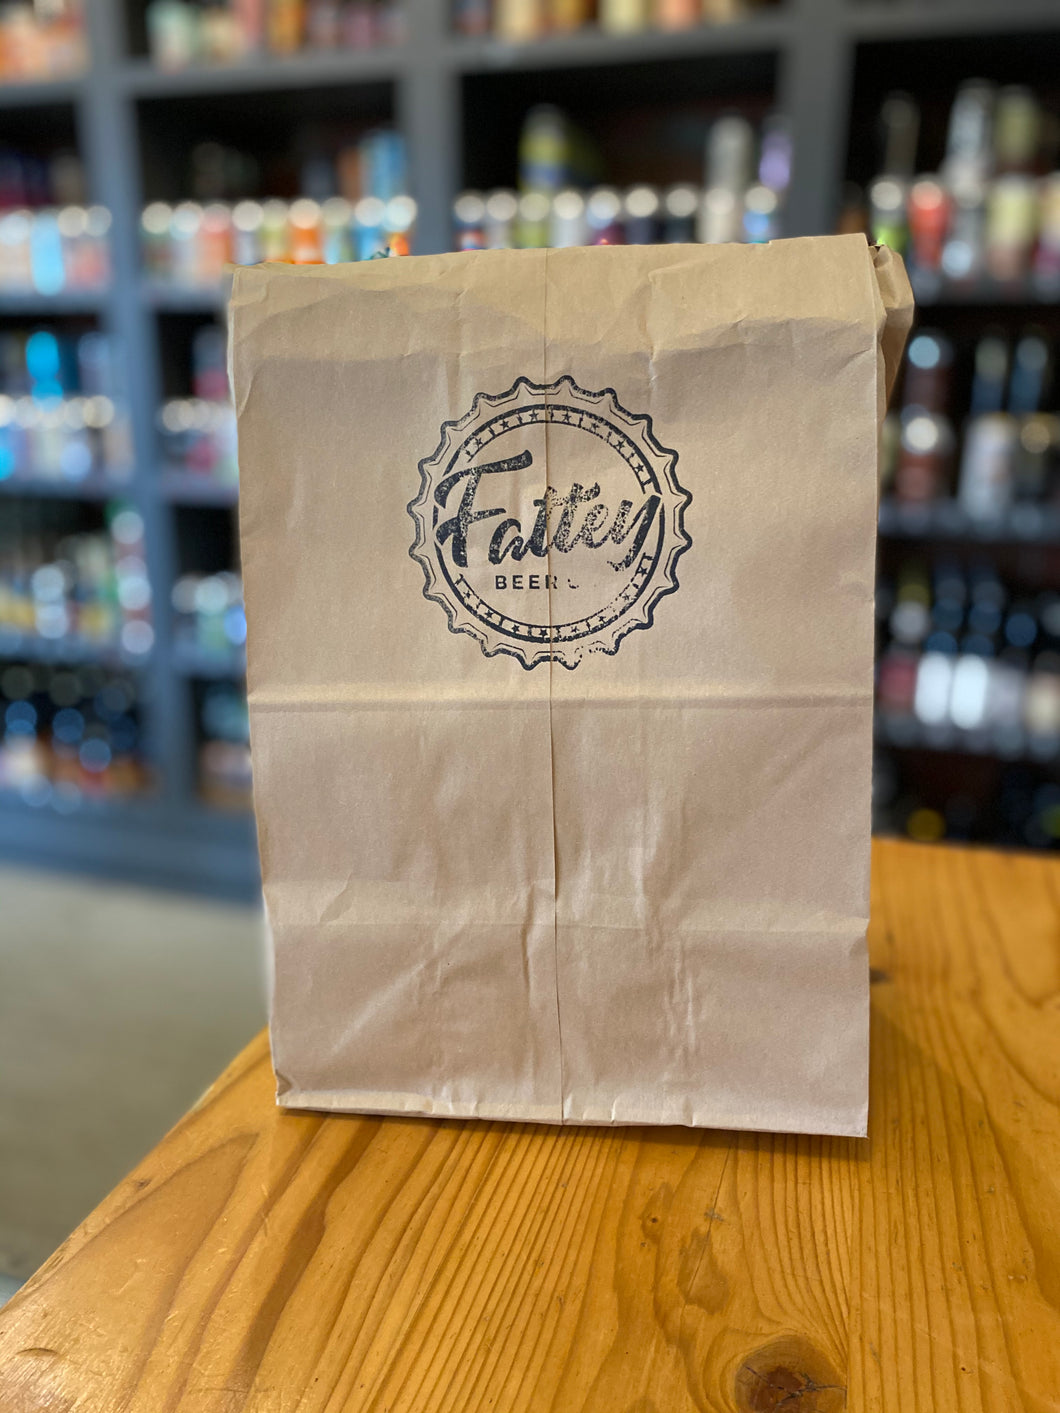 Survival 6-Pack from Fattey Beer